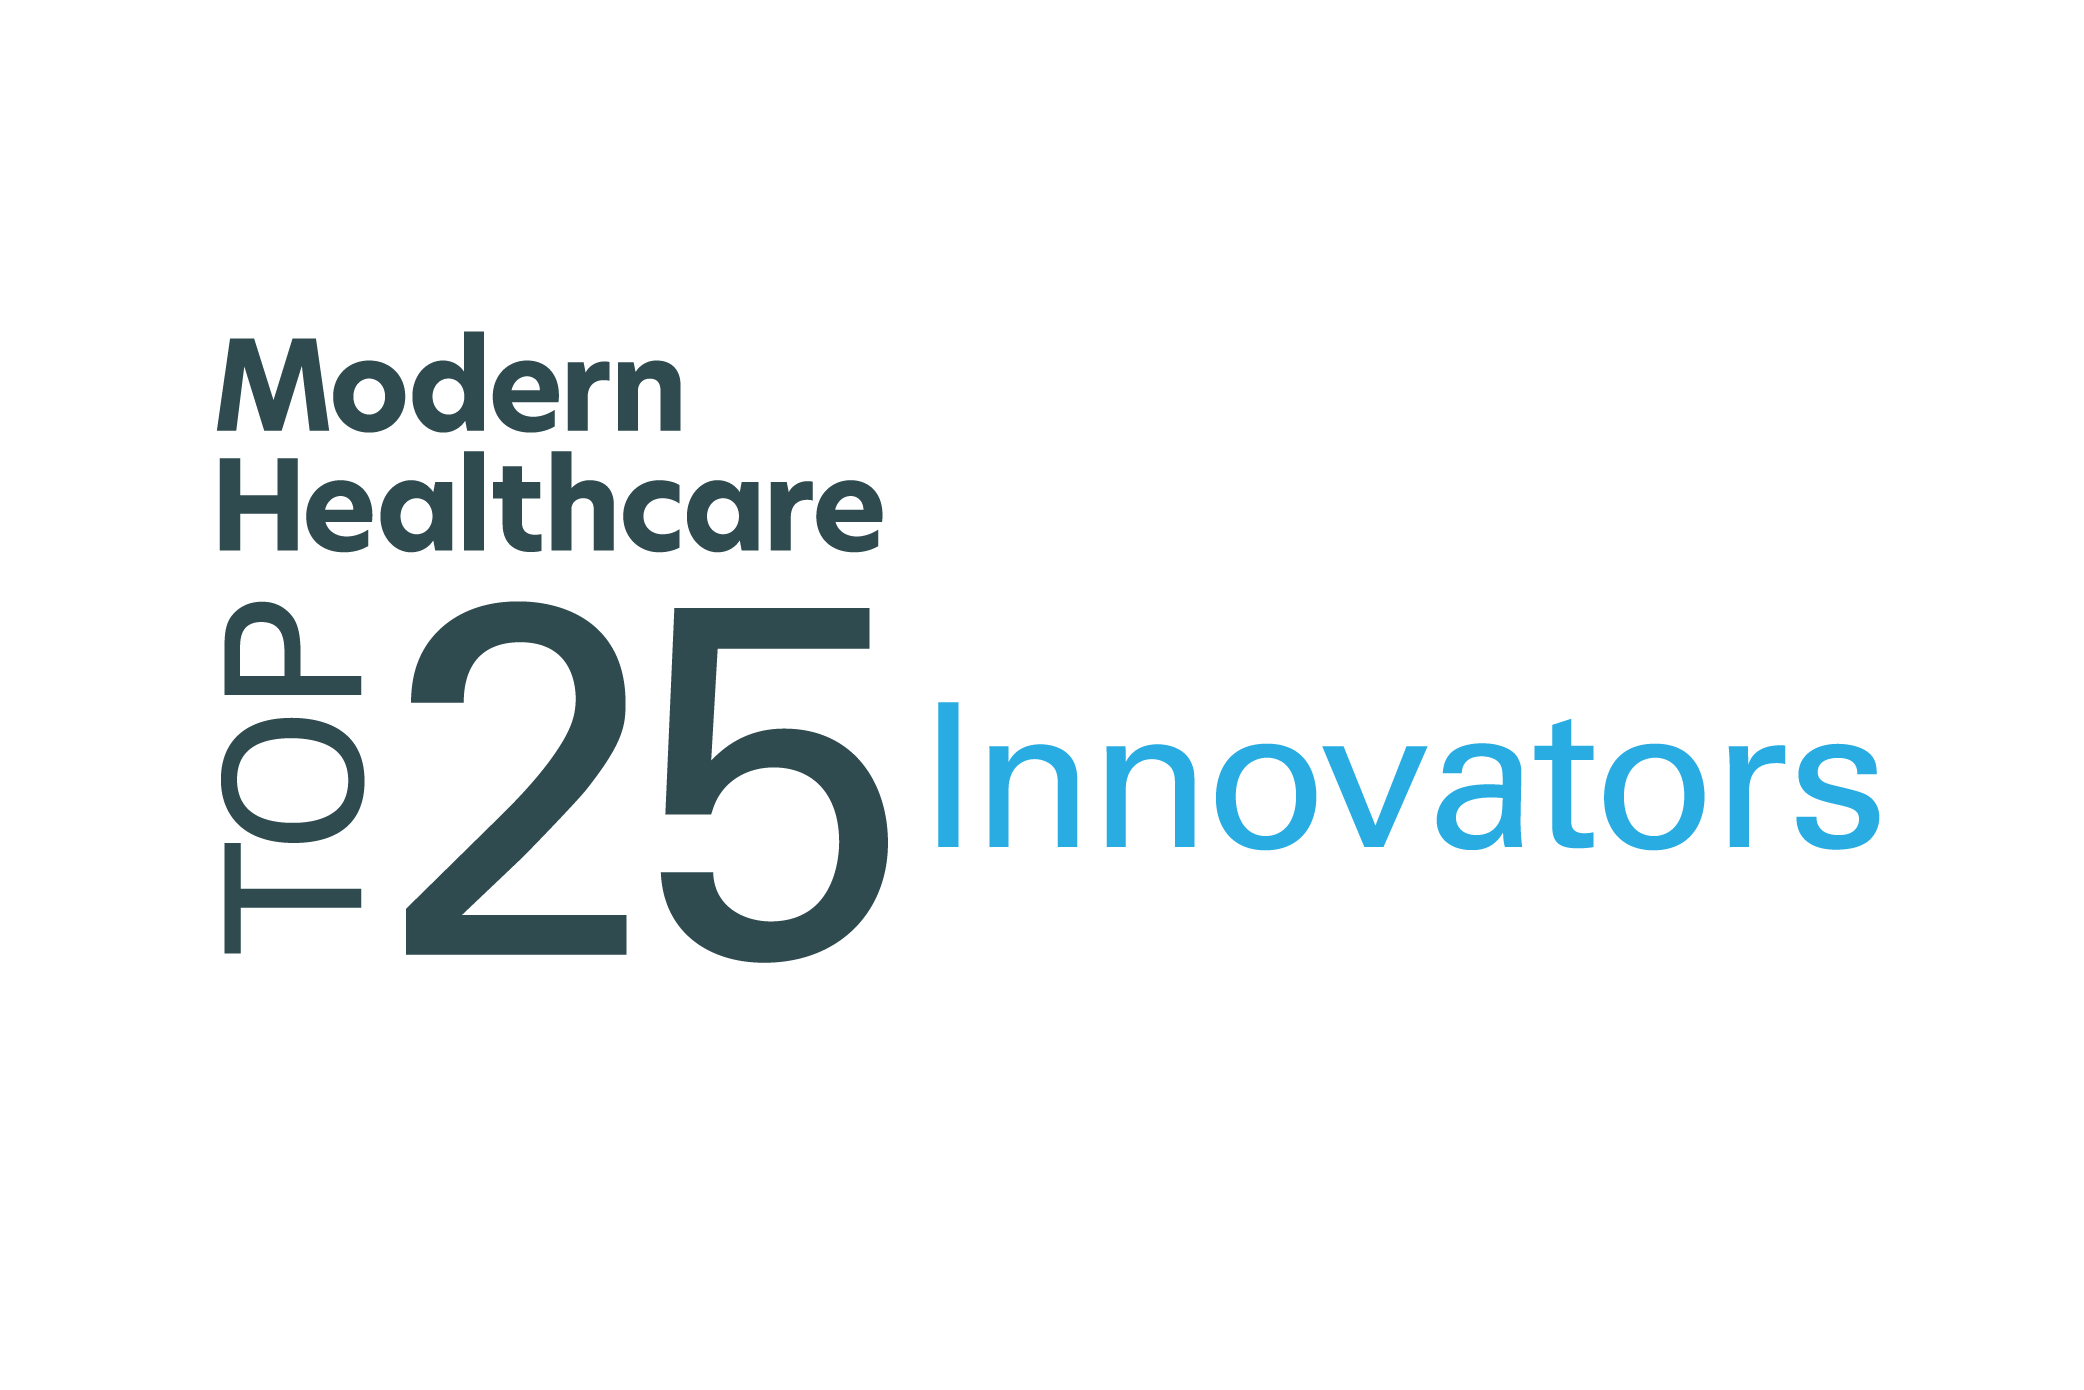 The 'Top 25 Innovators' in health care, according to Modern Healthcare GE HealthCare Command